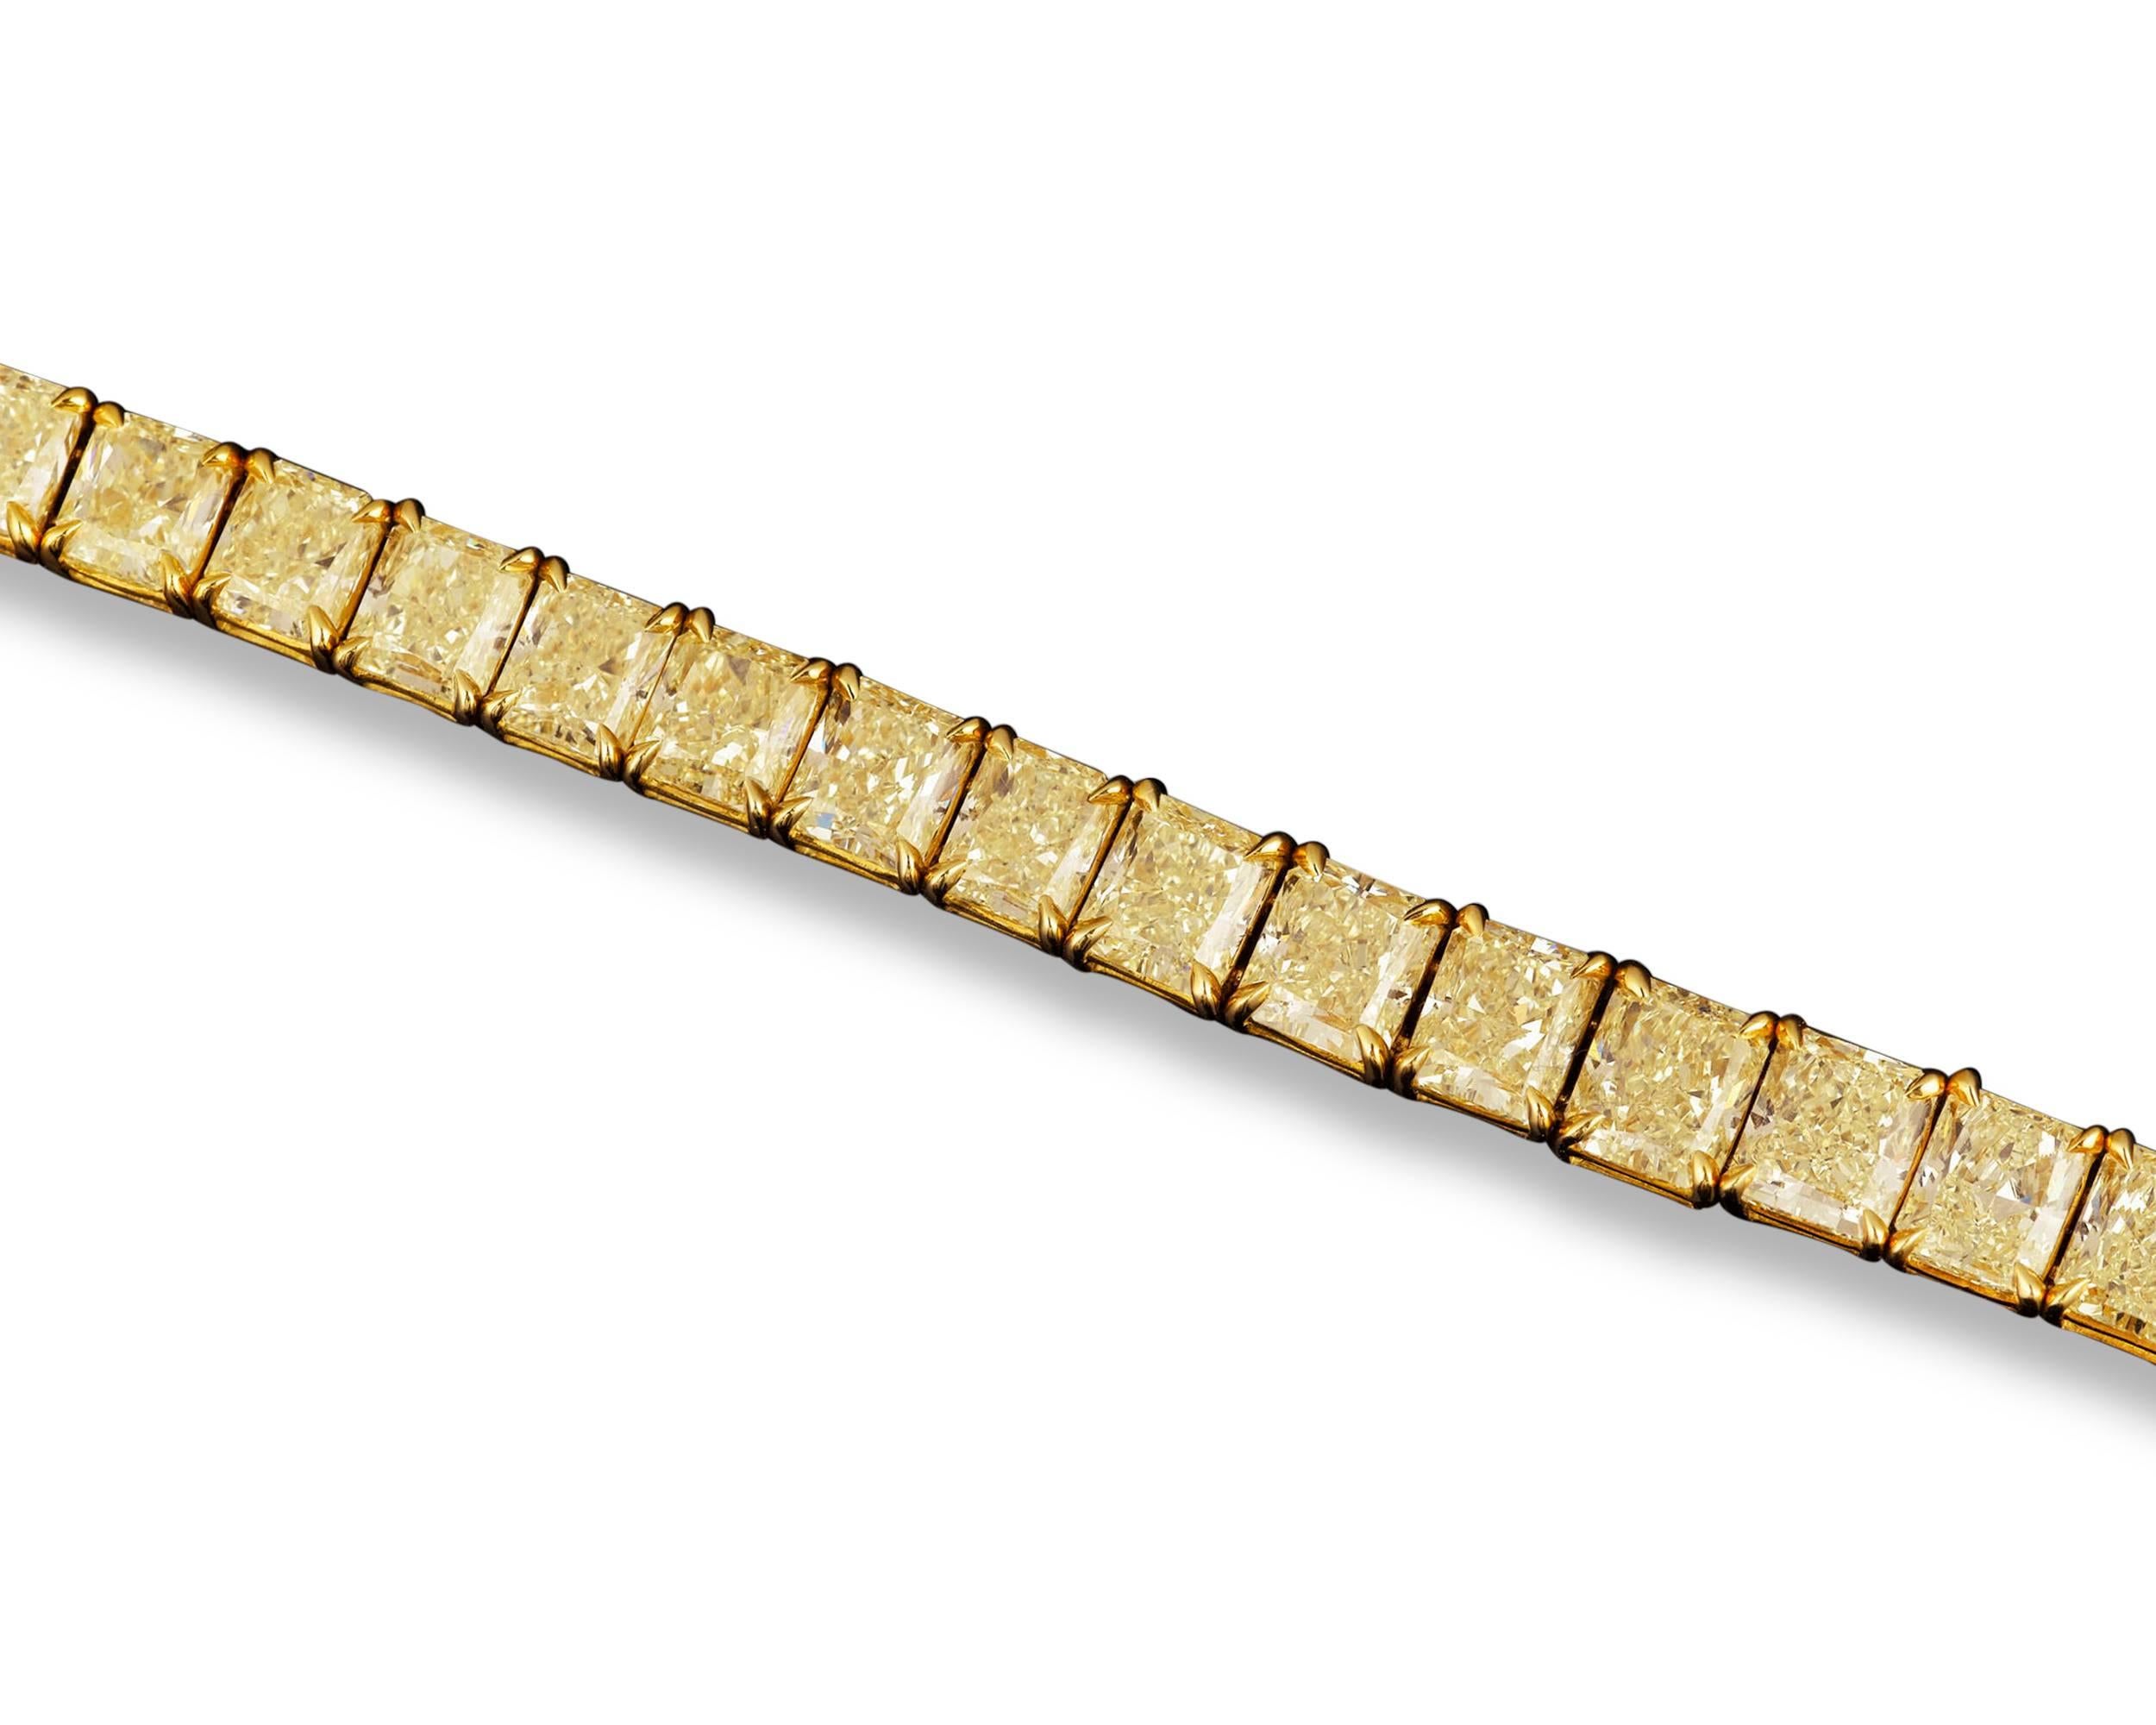 This incredible bracelet boasts 31 rare and perfectly matched natural fancy yellow diamonds totaling 32.08 carats. Set in 18K yellow gold, these beautiful, radiant-cut diamonds, weighing approximately 1.03 carats each, sparkle with intense fire and